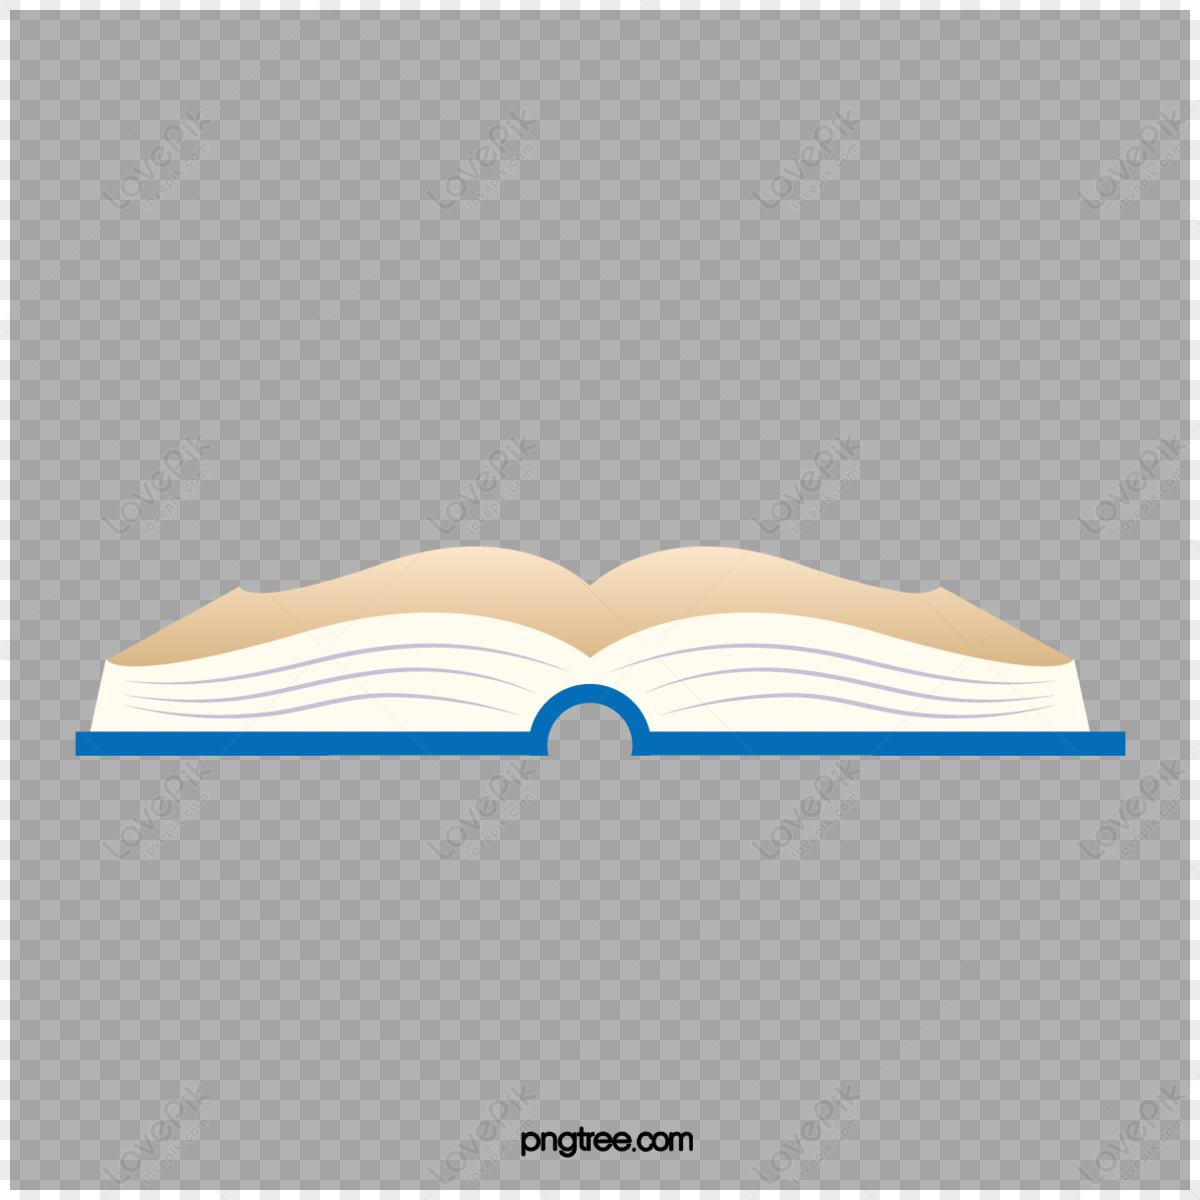 Office stationery books books student supplies,color stationery,cartoon stationery png transparent background